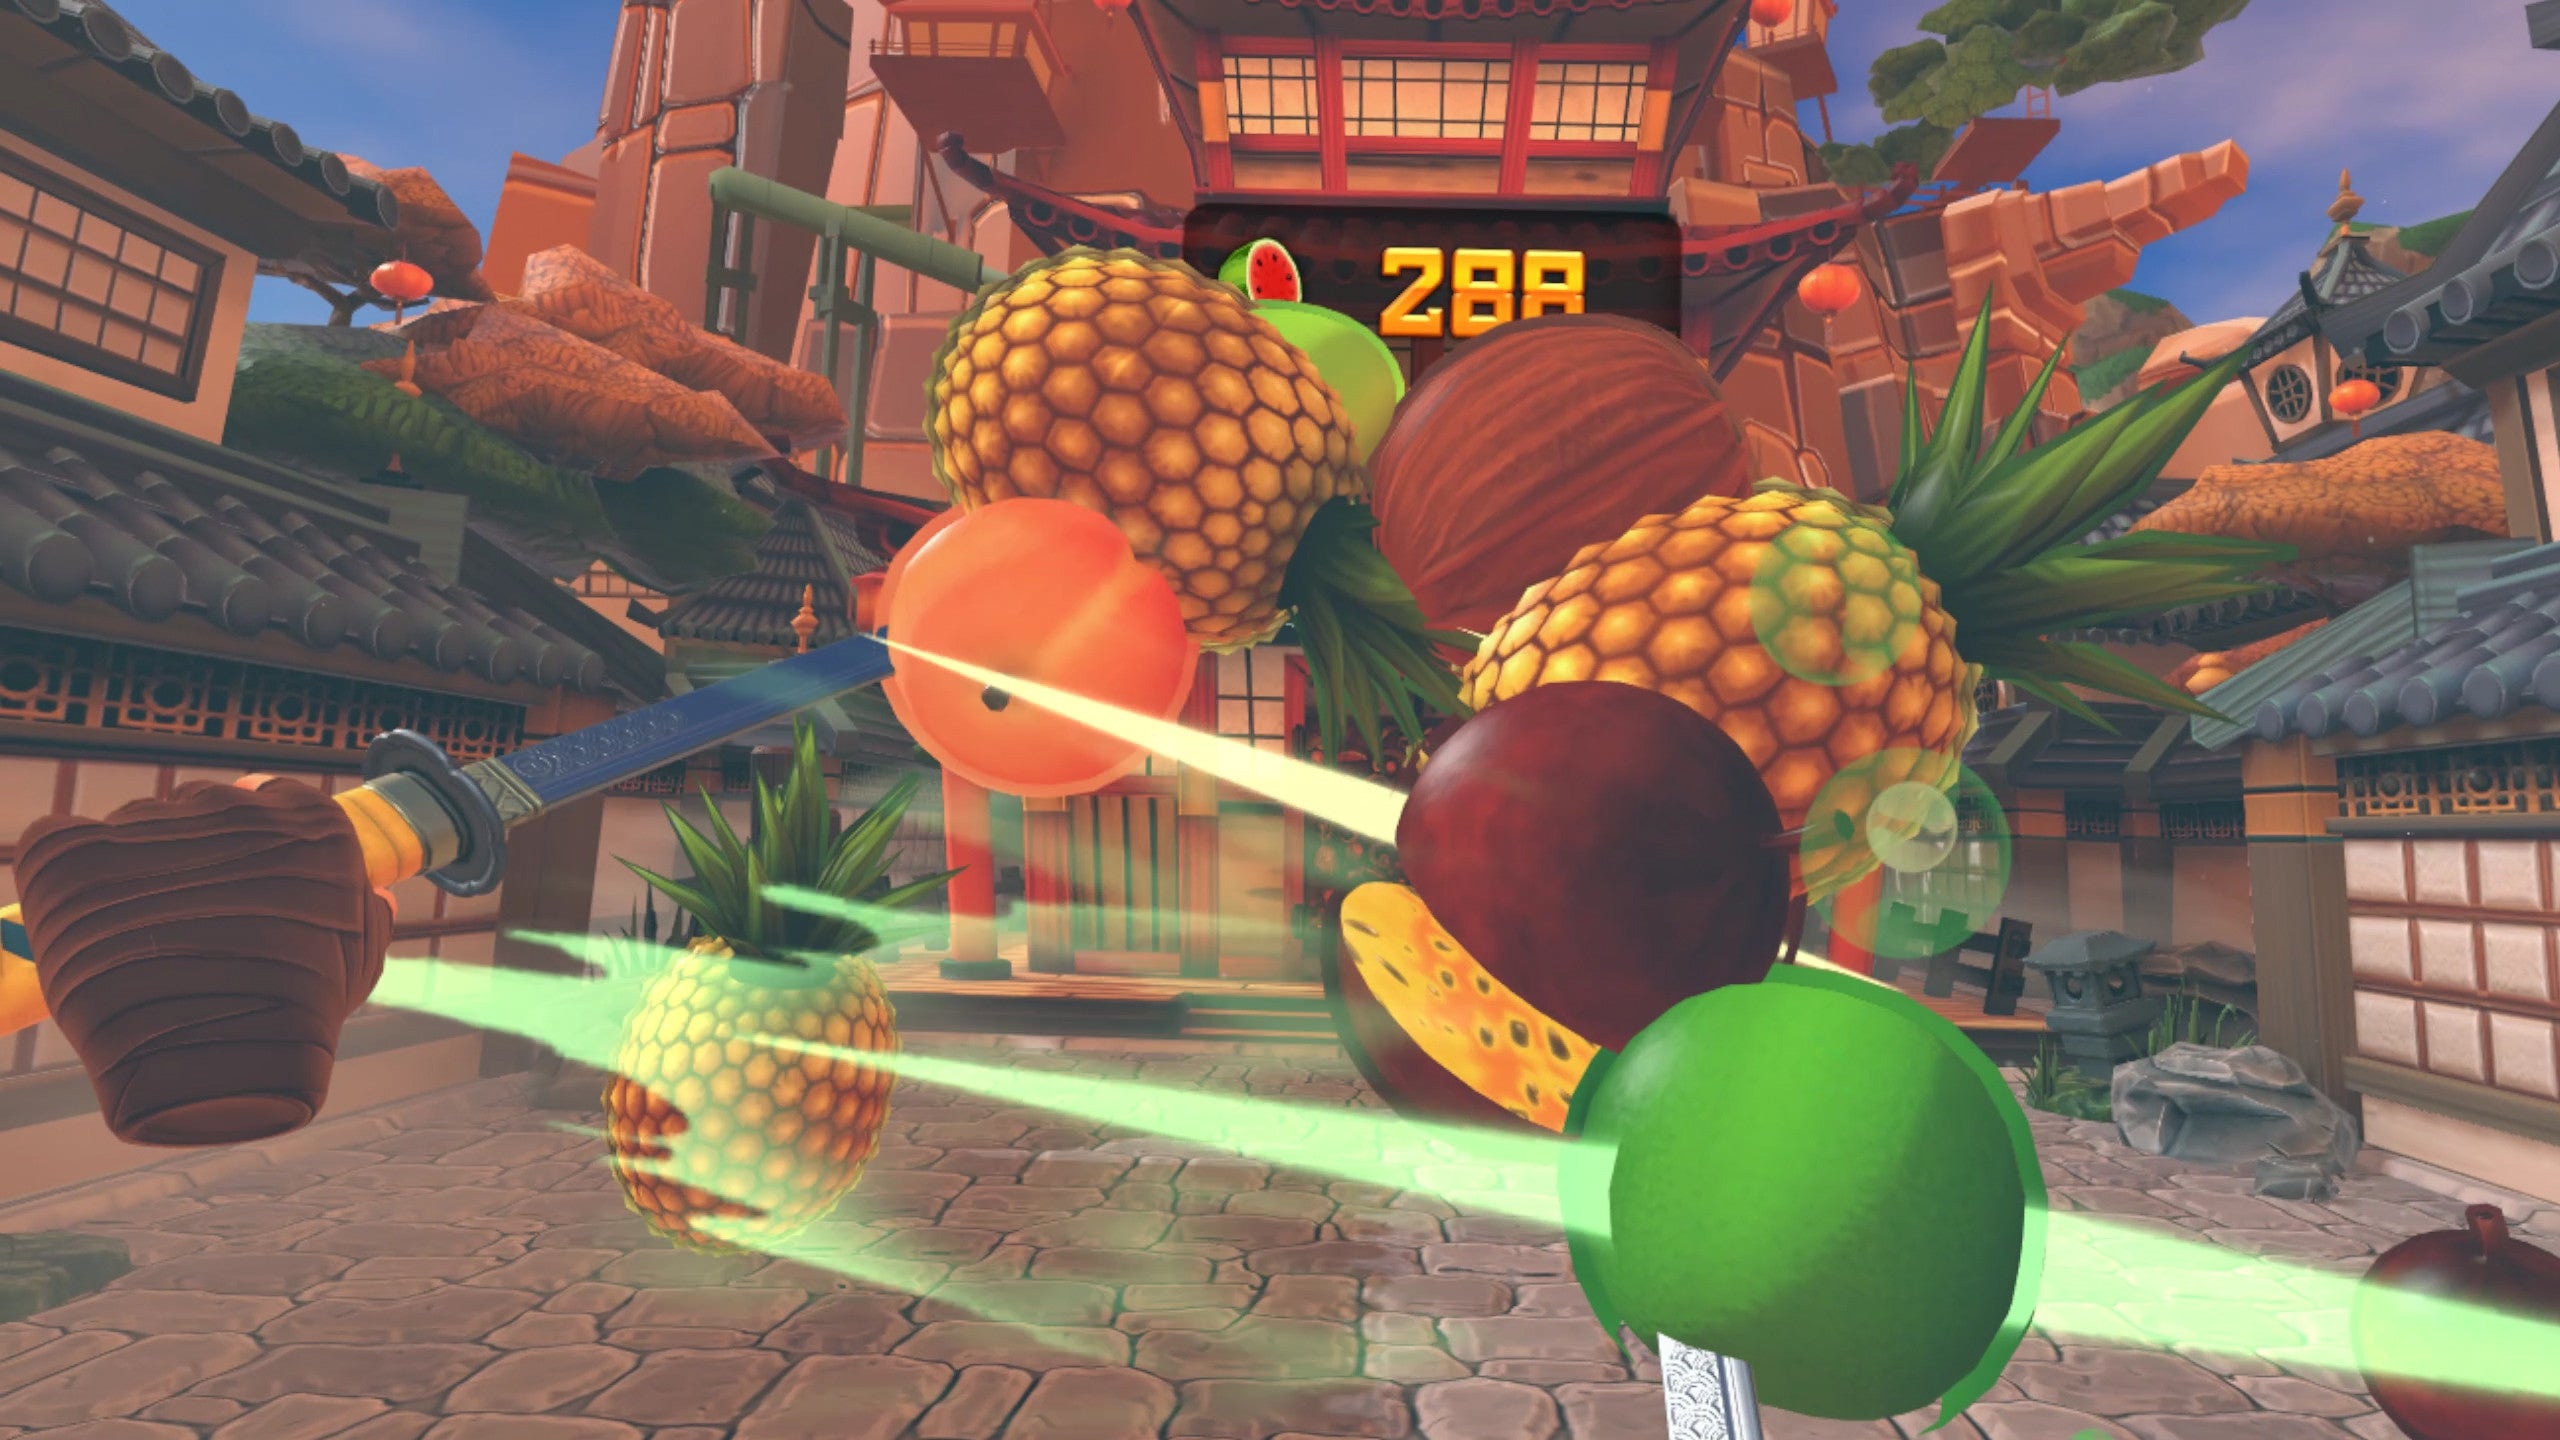 Swords slicing coconuts, pineapples, and more fruits in a Fruit Ninja VR screenshot.